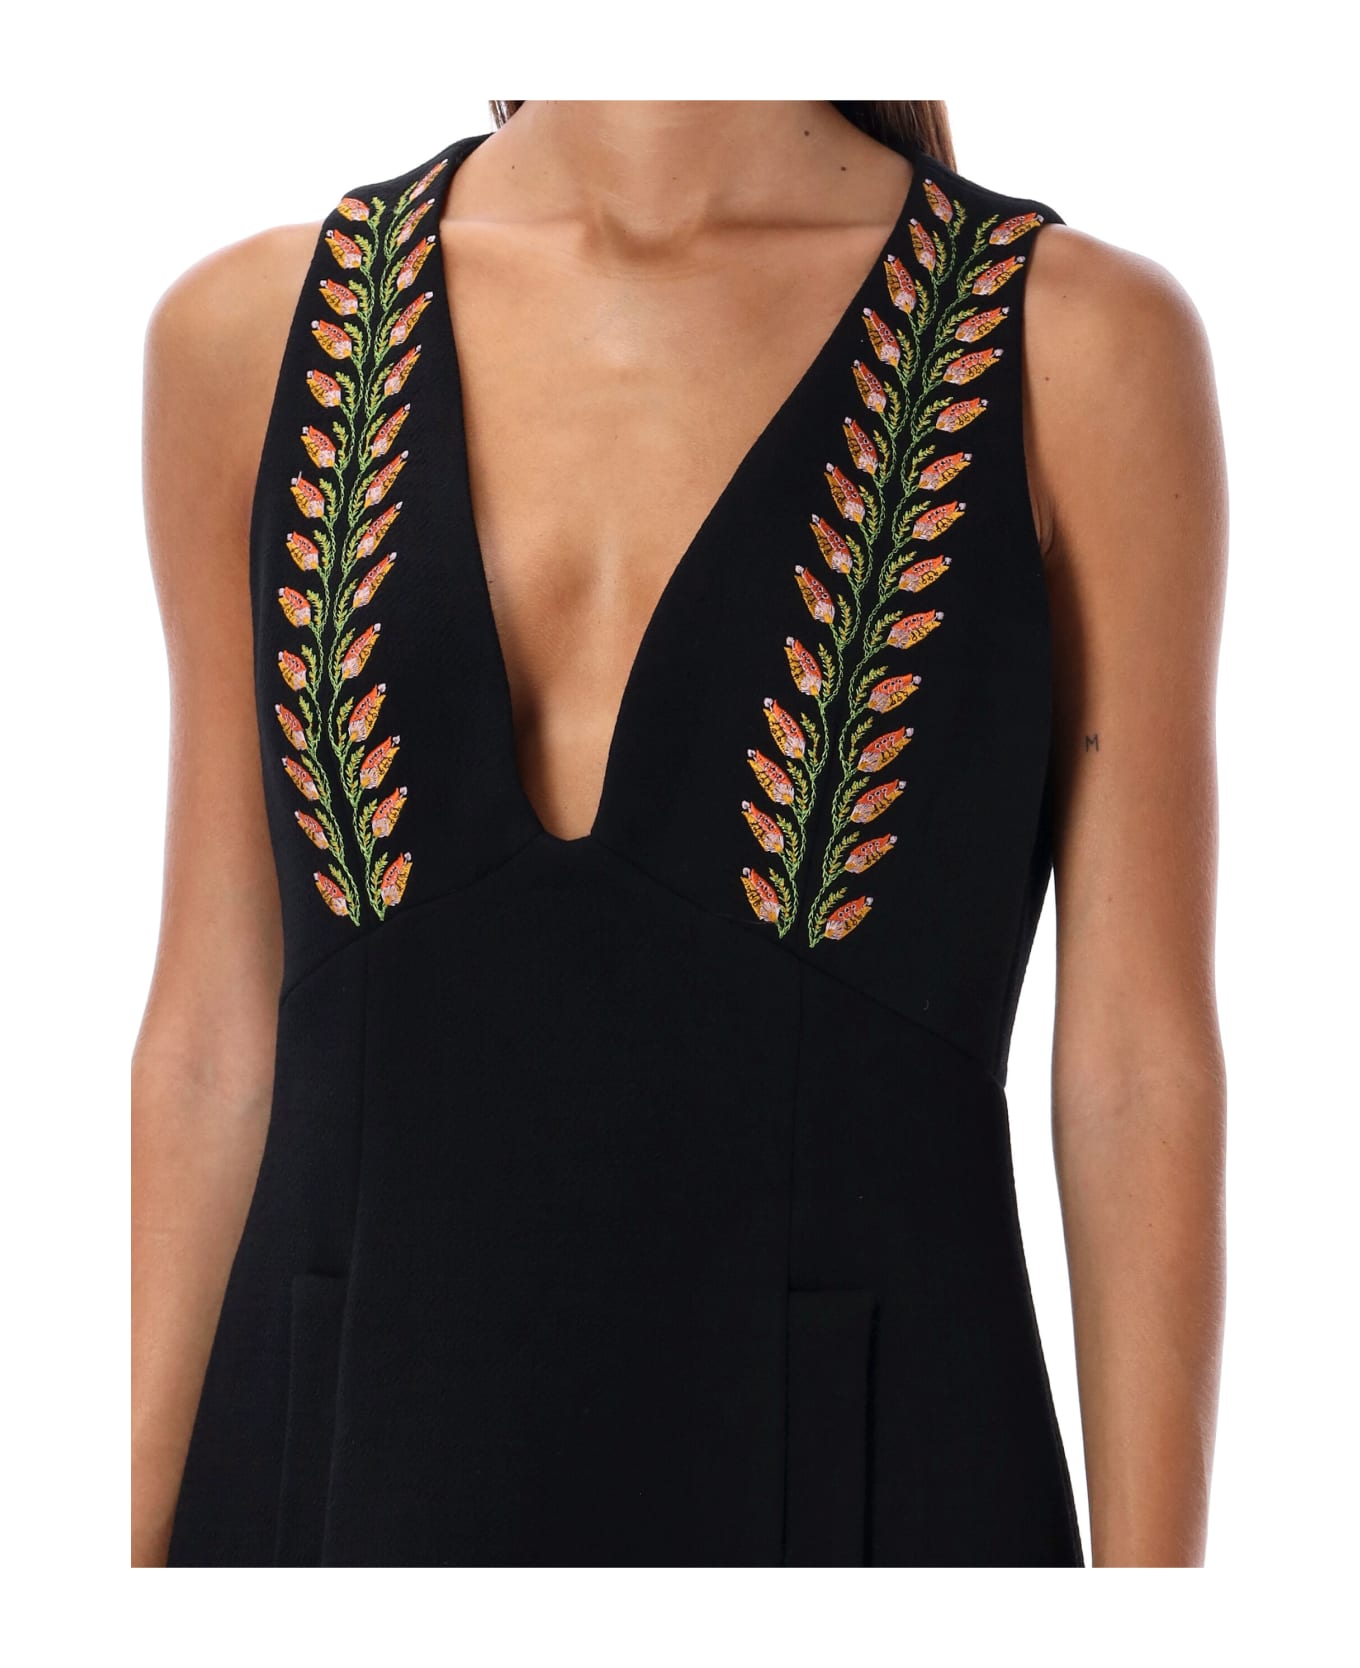 Etro Black Wool Mini Dress With Floral Embroidery - Black